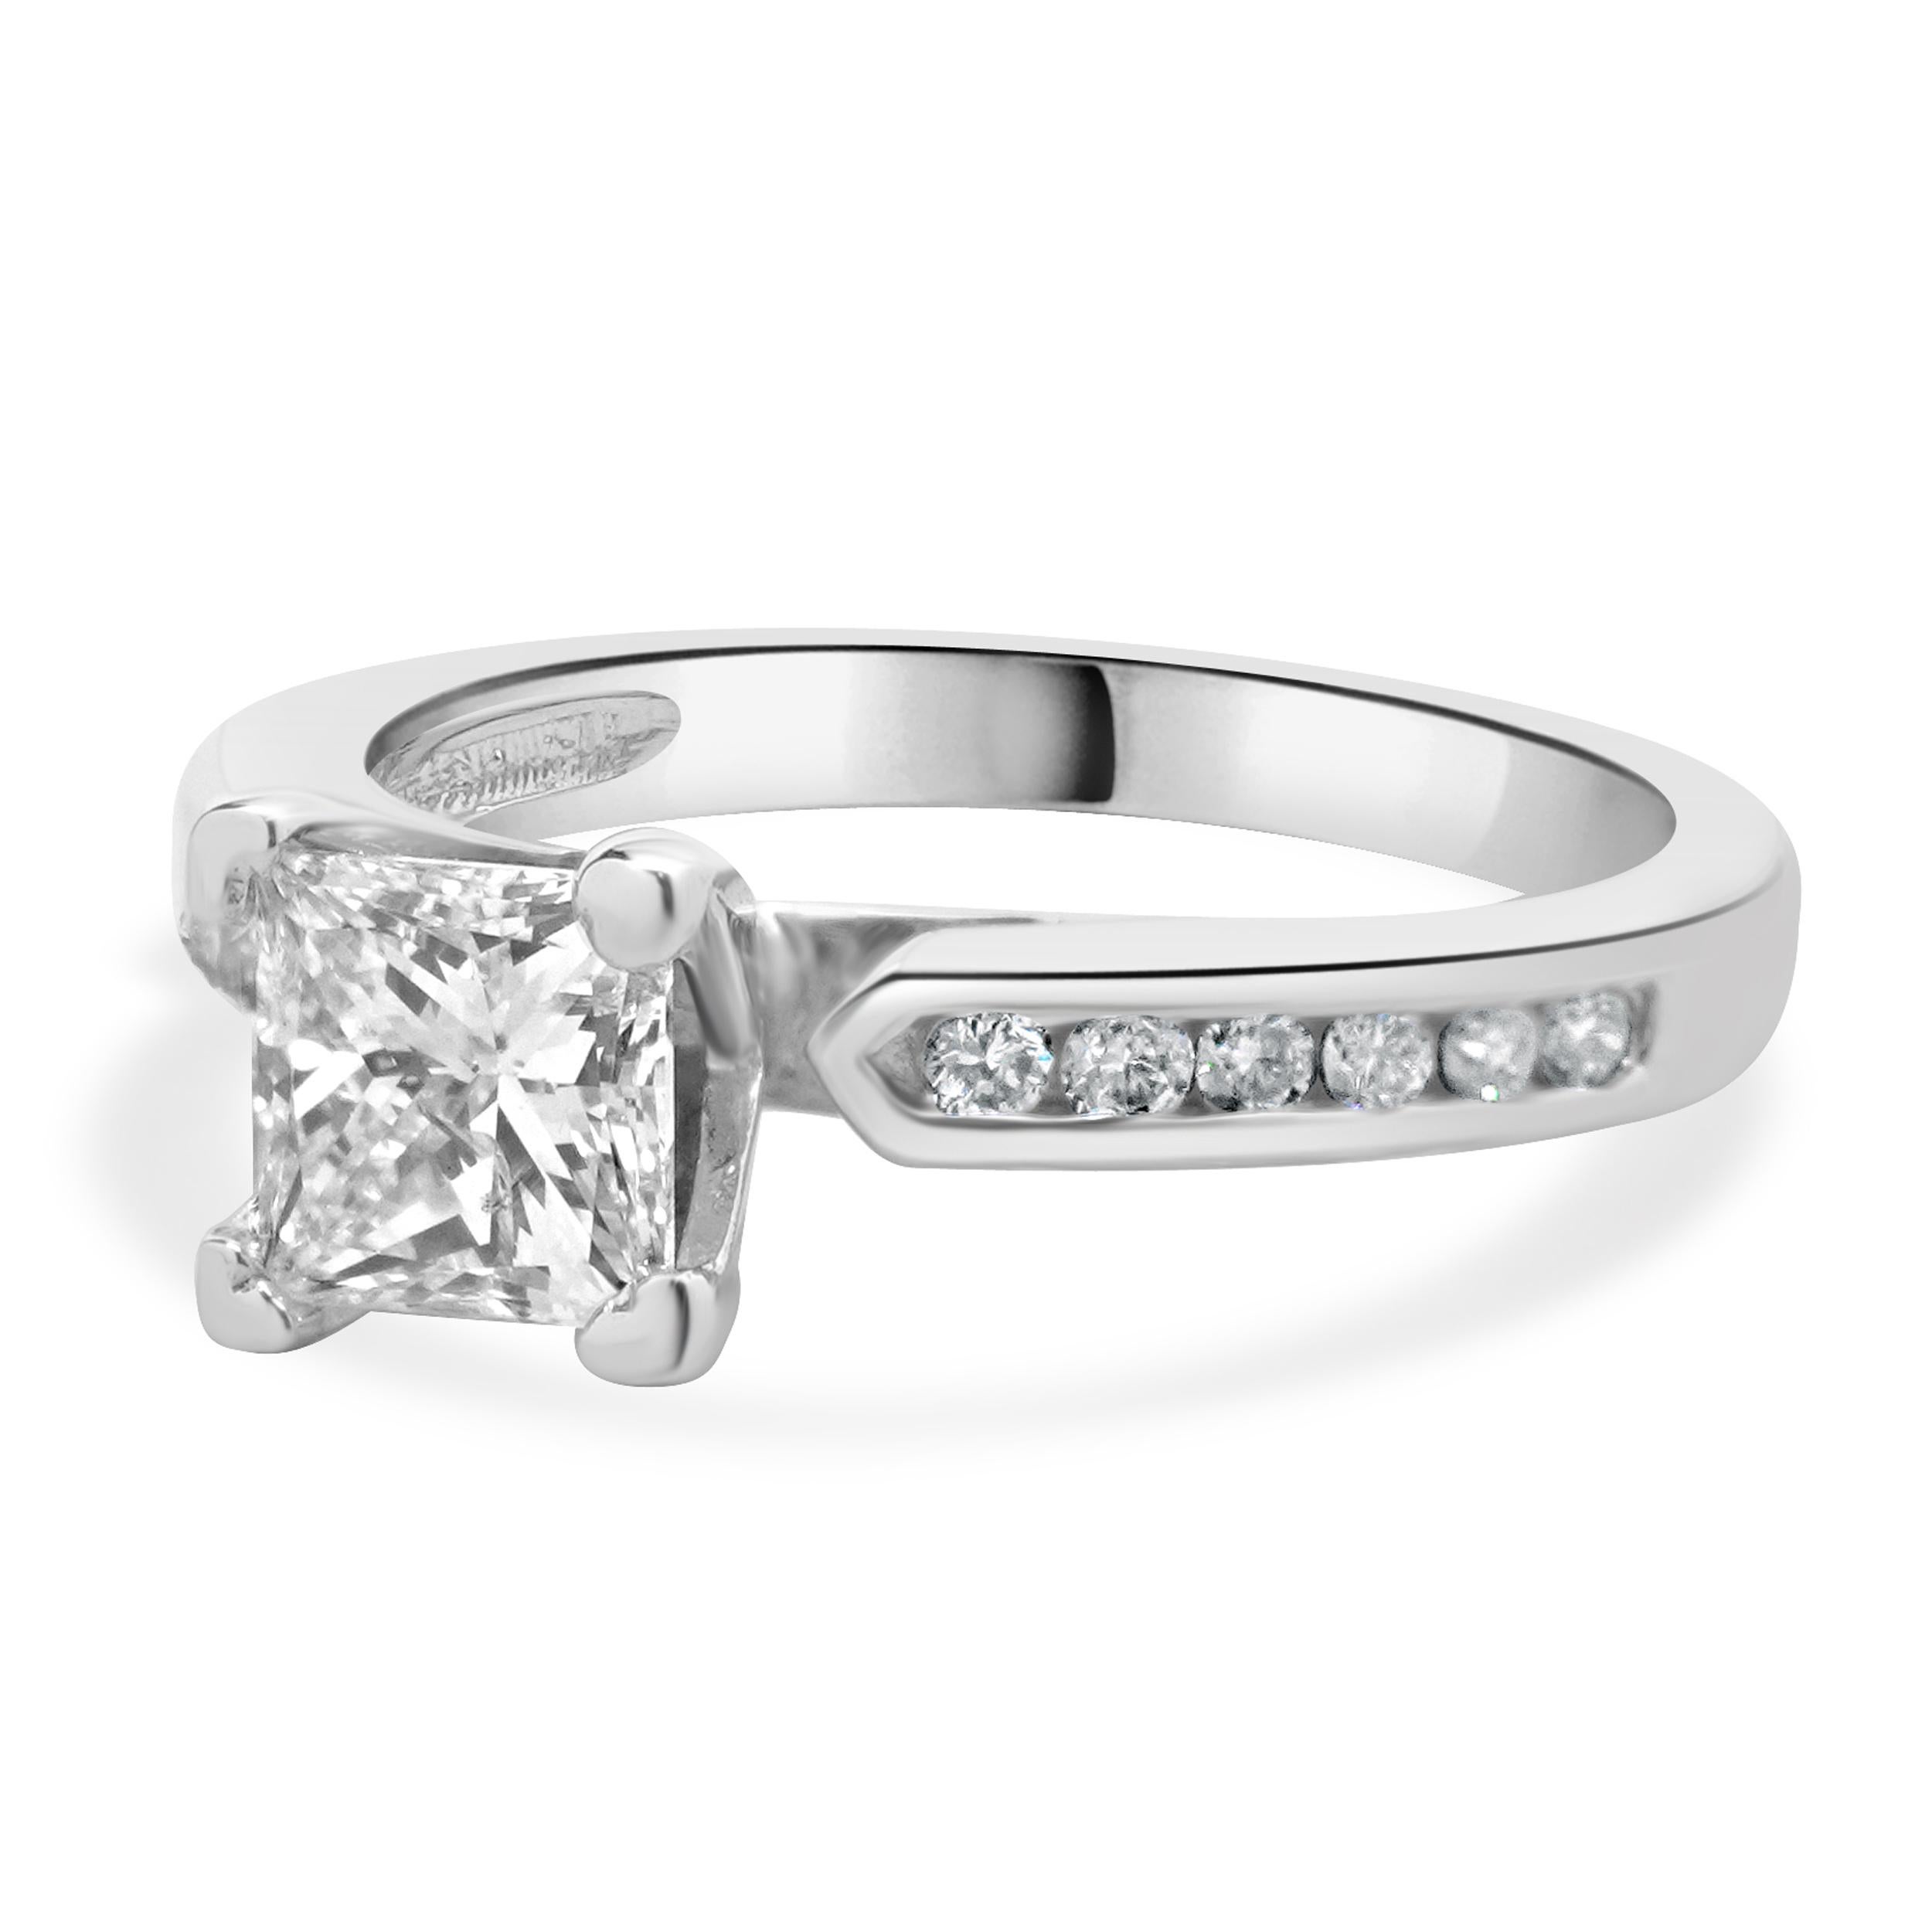 Designer: custom
Material: 14K white gold
Center Diamond: 1 princess cut = .97ct
Color : G
Clarity : I1
Diamond: 12 round brilliant cut = 0.24cttw
Color : H
Clarity : SI1
Dimensions: ring top measures 7mm
Size: 6.5 complimentary sizing available